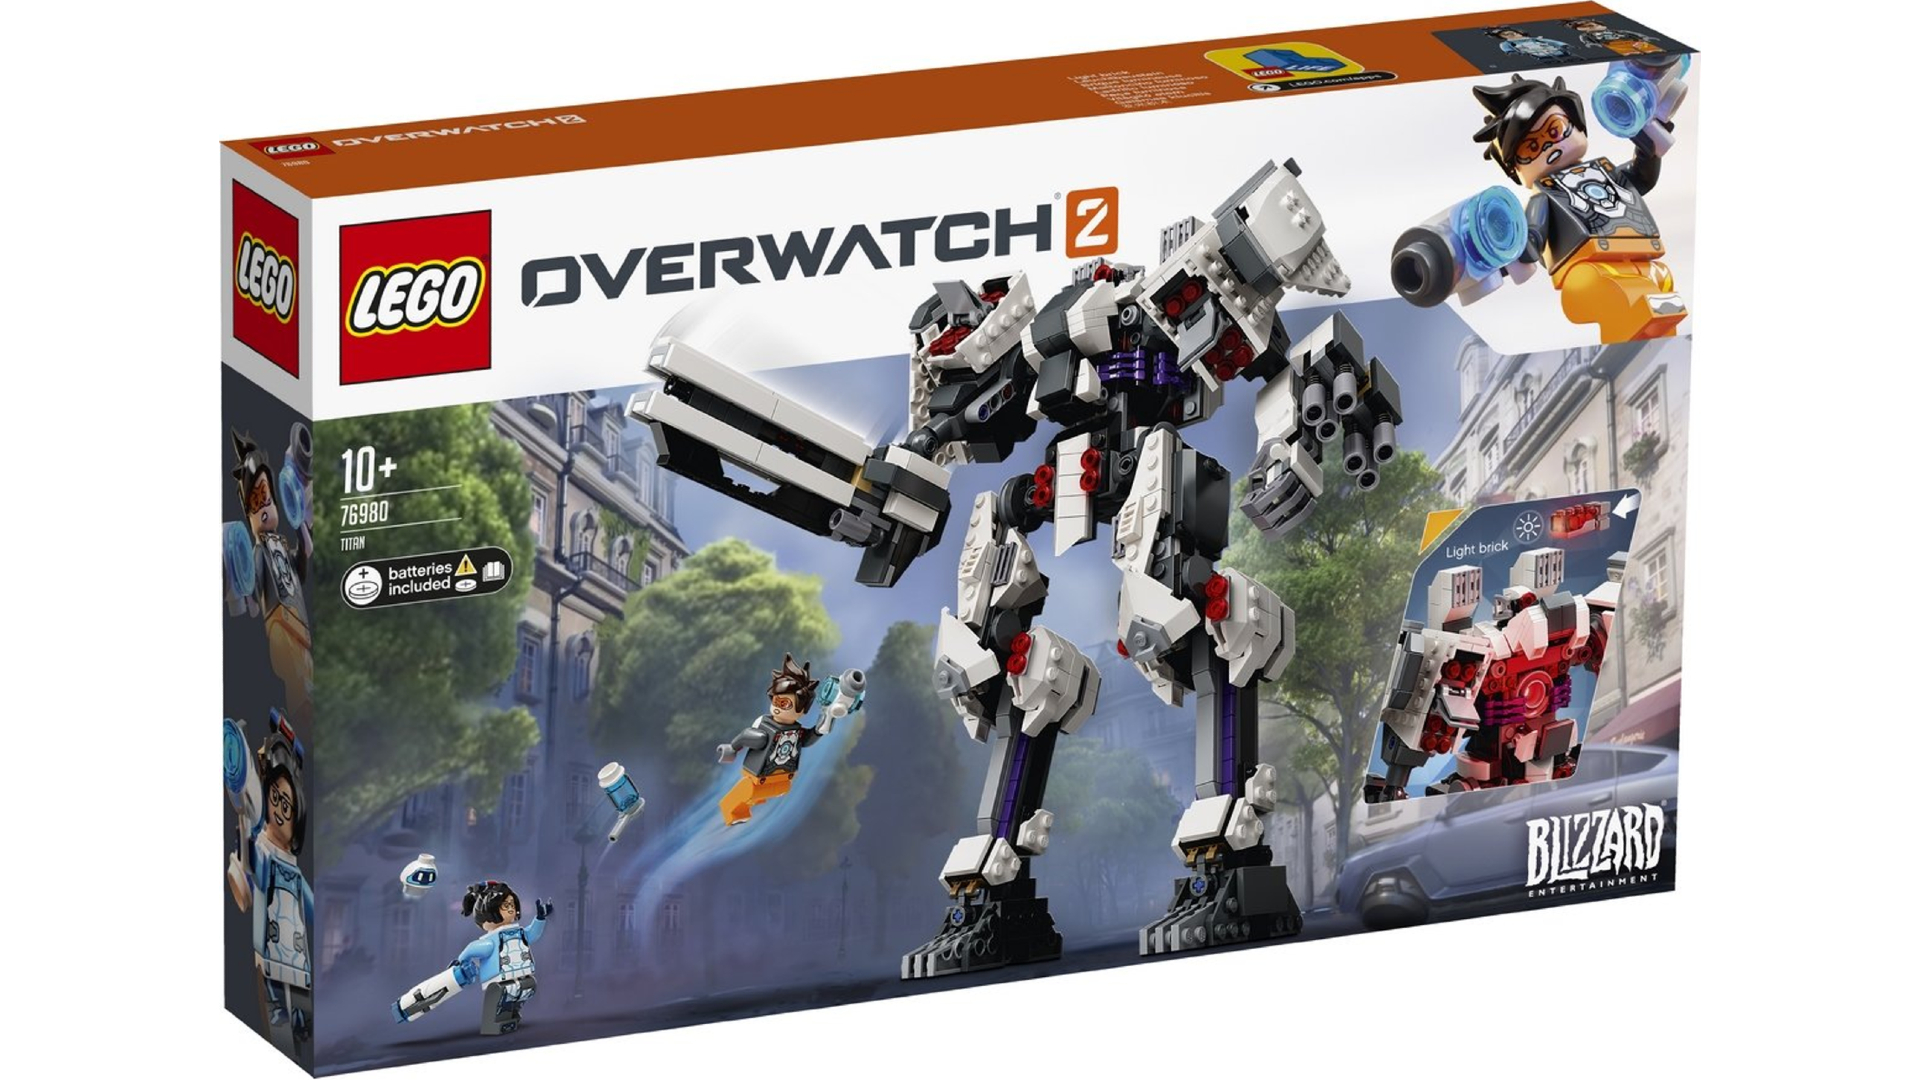  Lego halts Overwatch 2 set while it re-evaluates partnership with Activision Blizzard 